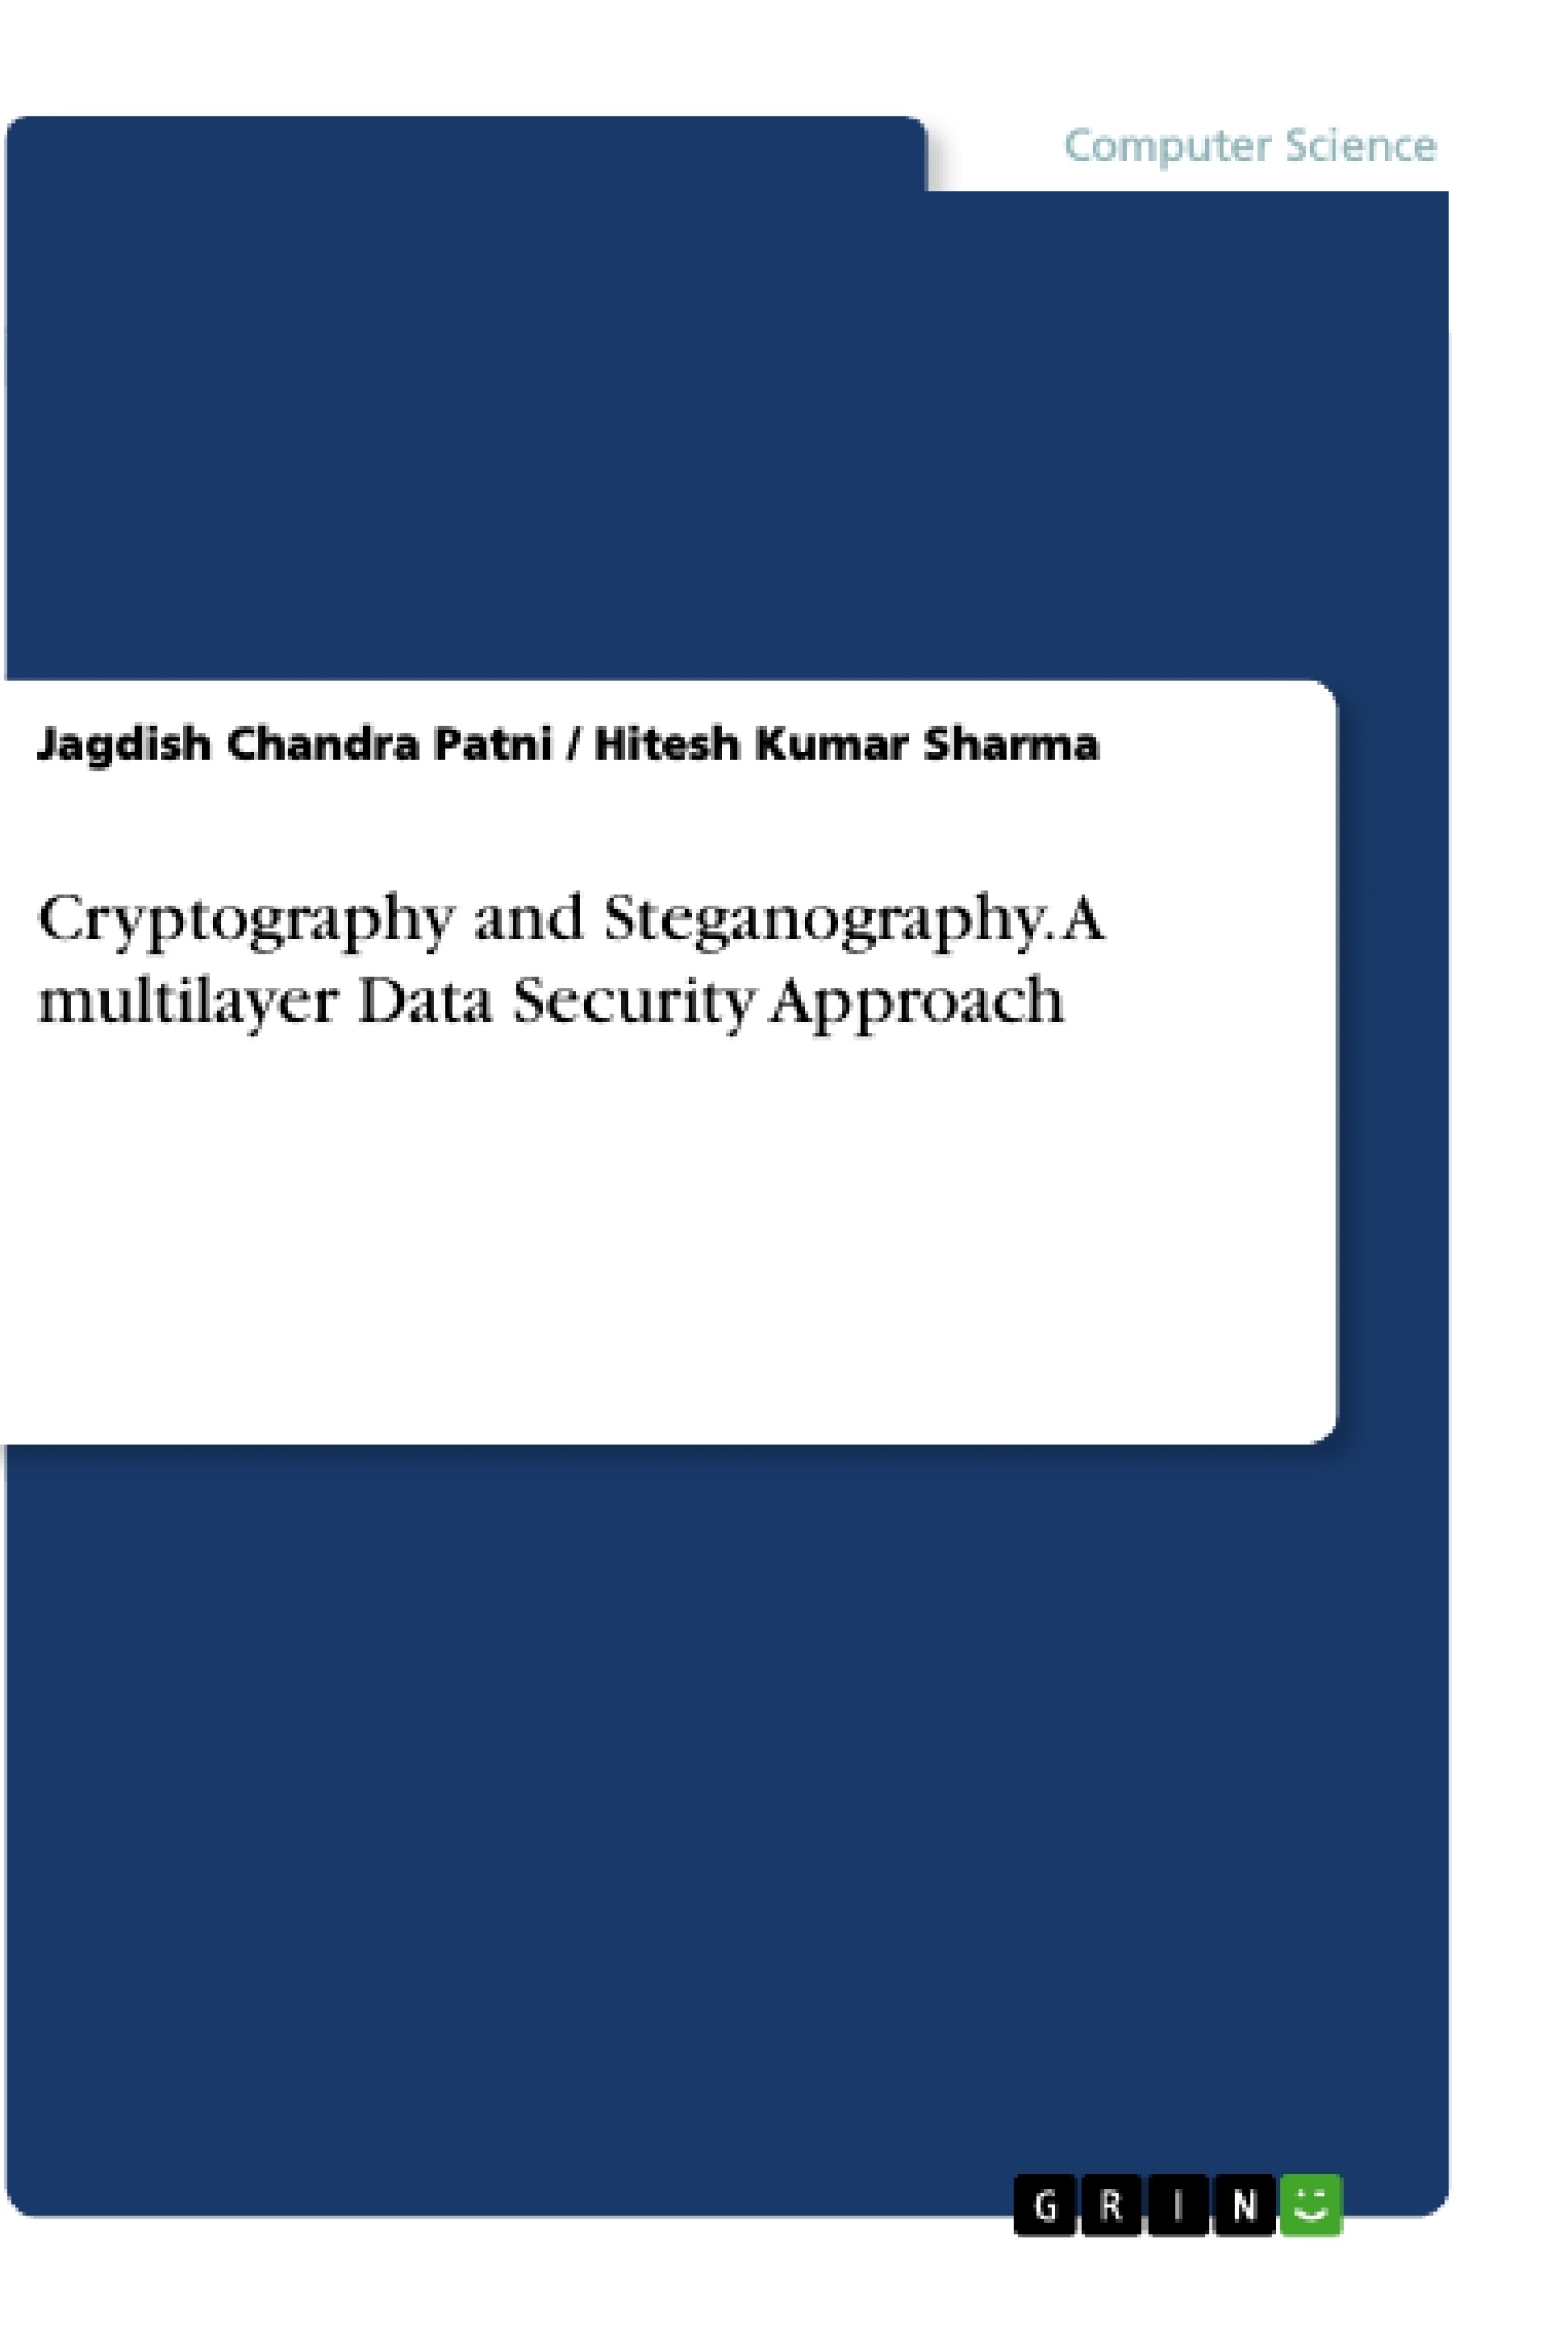 Titel: Cryptography and Steganography. A multilayer Data Security Approach